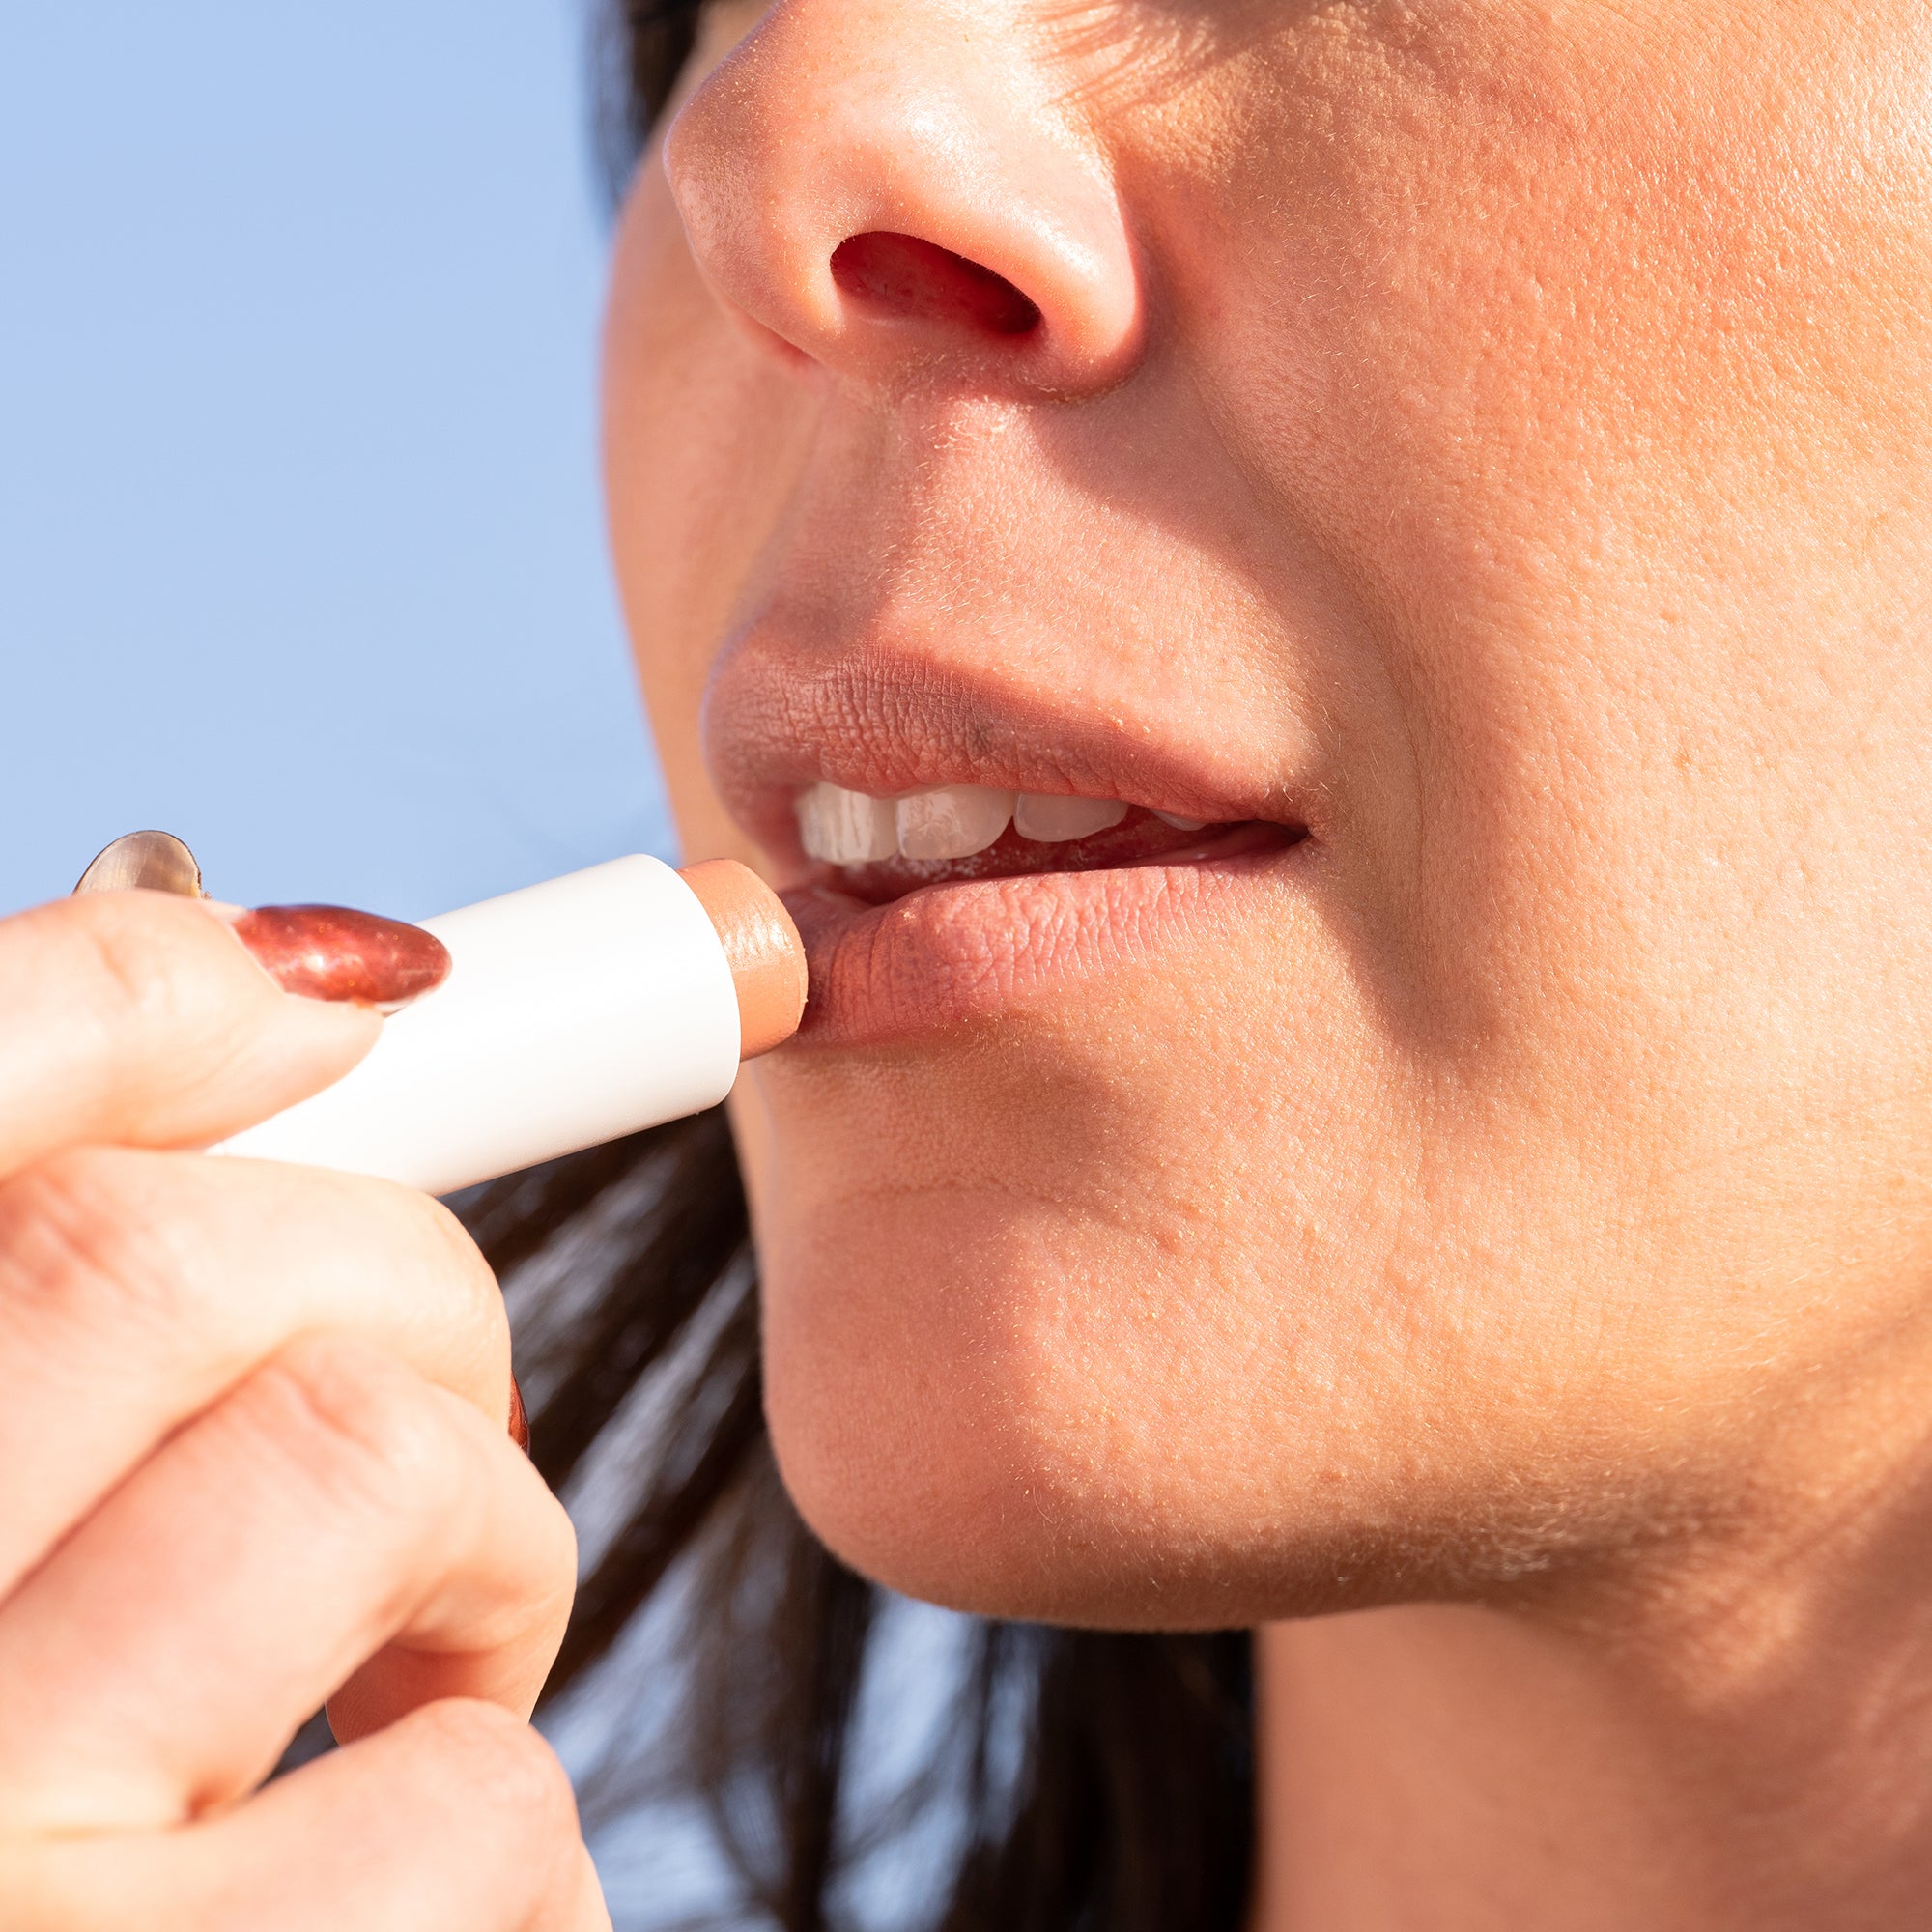 Sunburned Lips and How to Protect Them